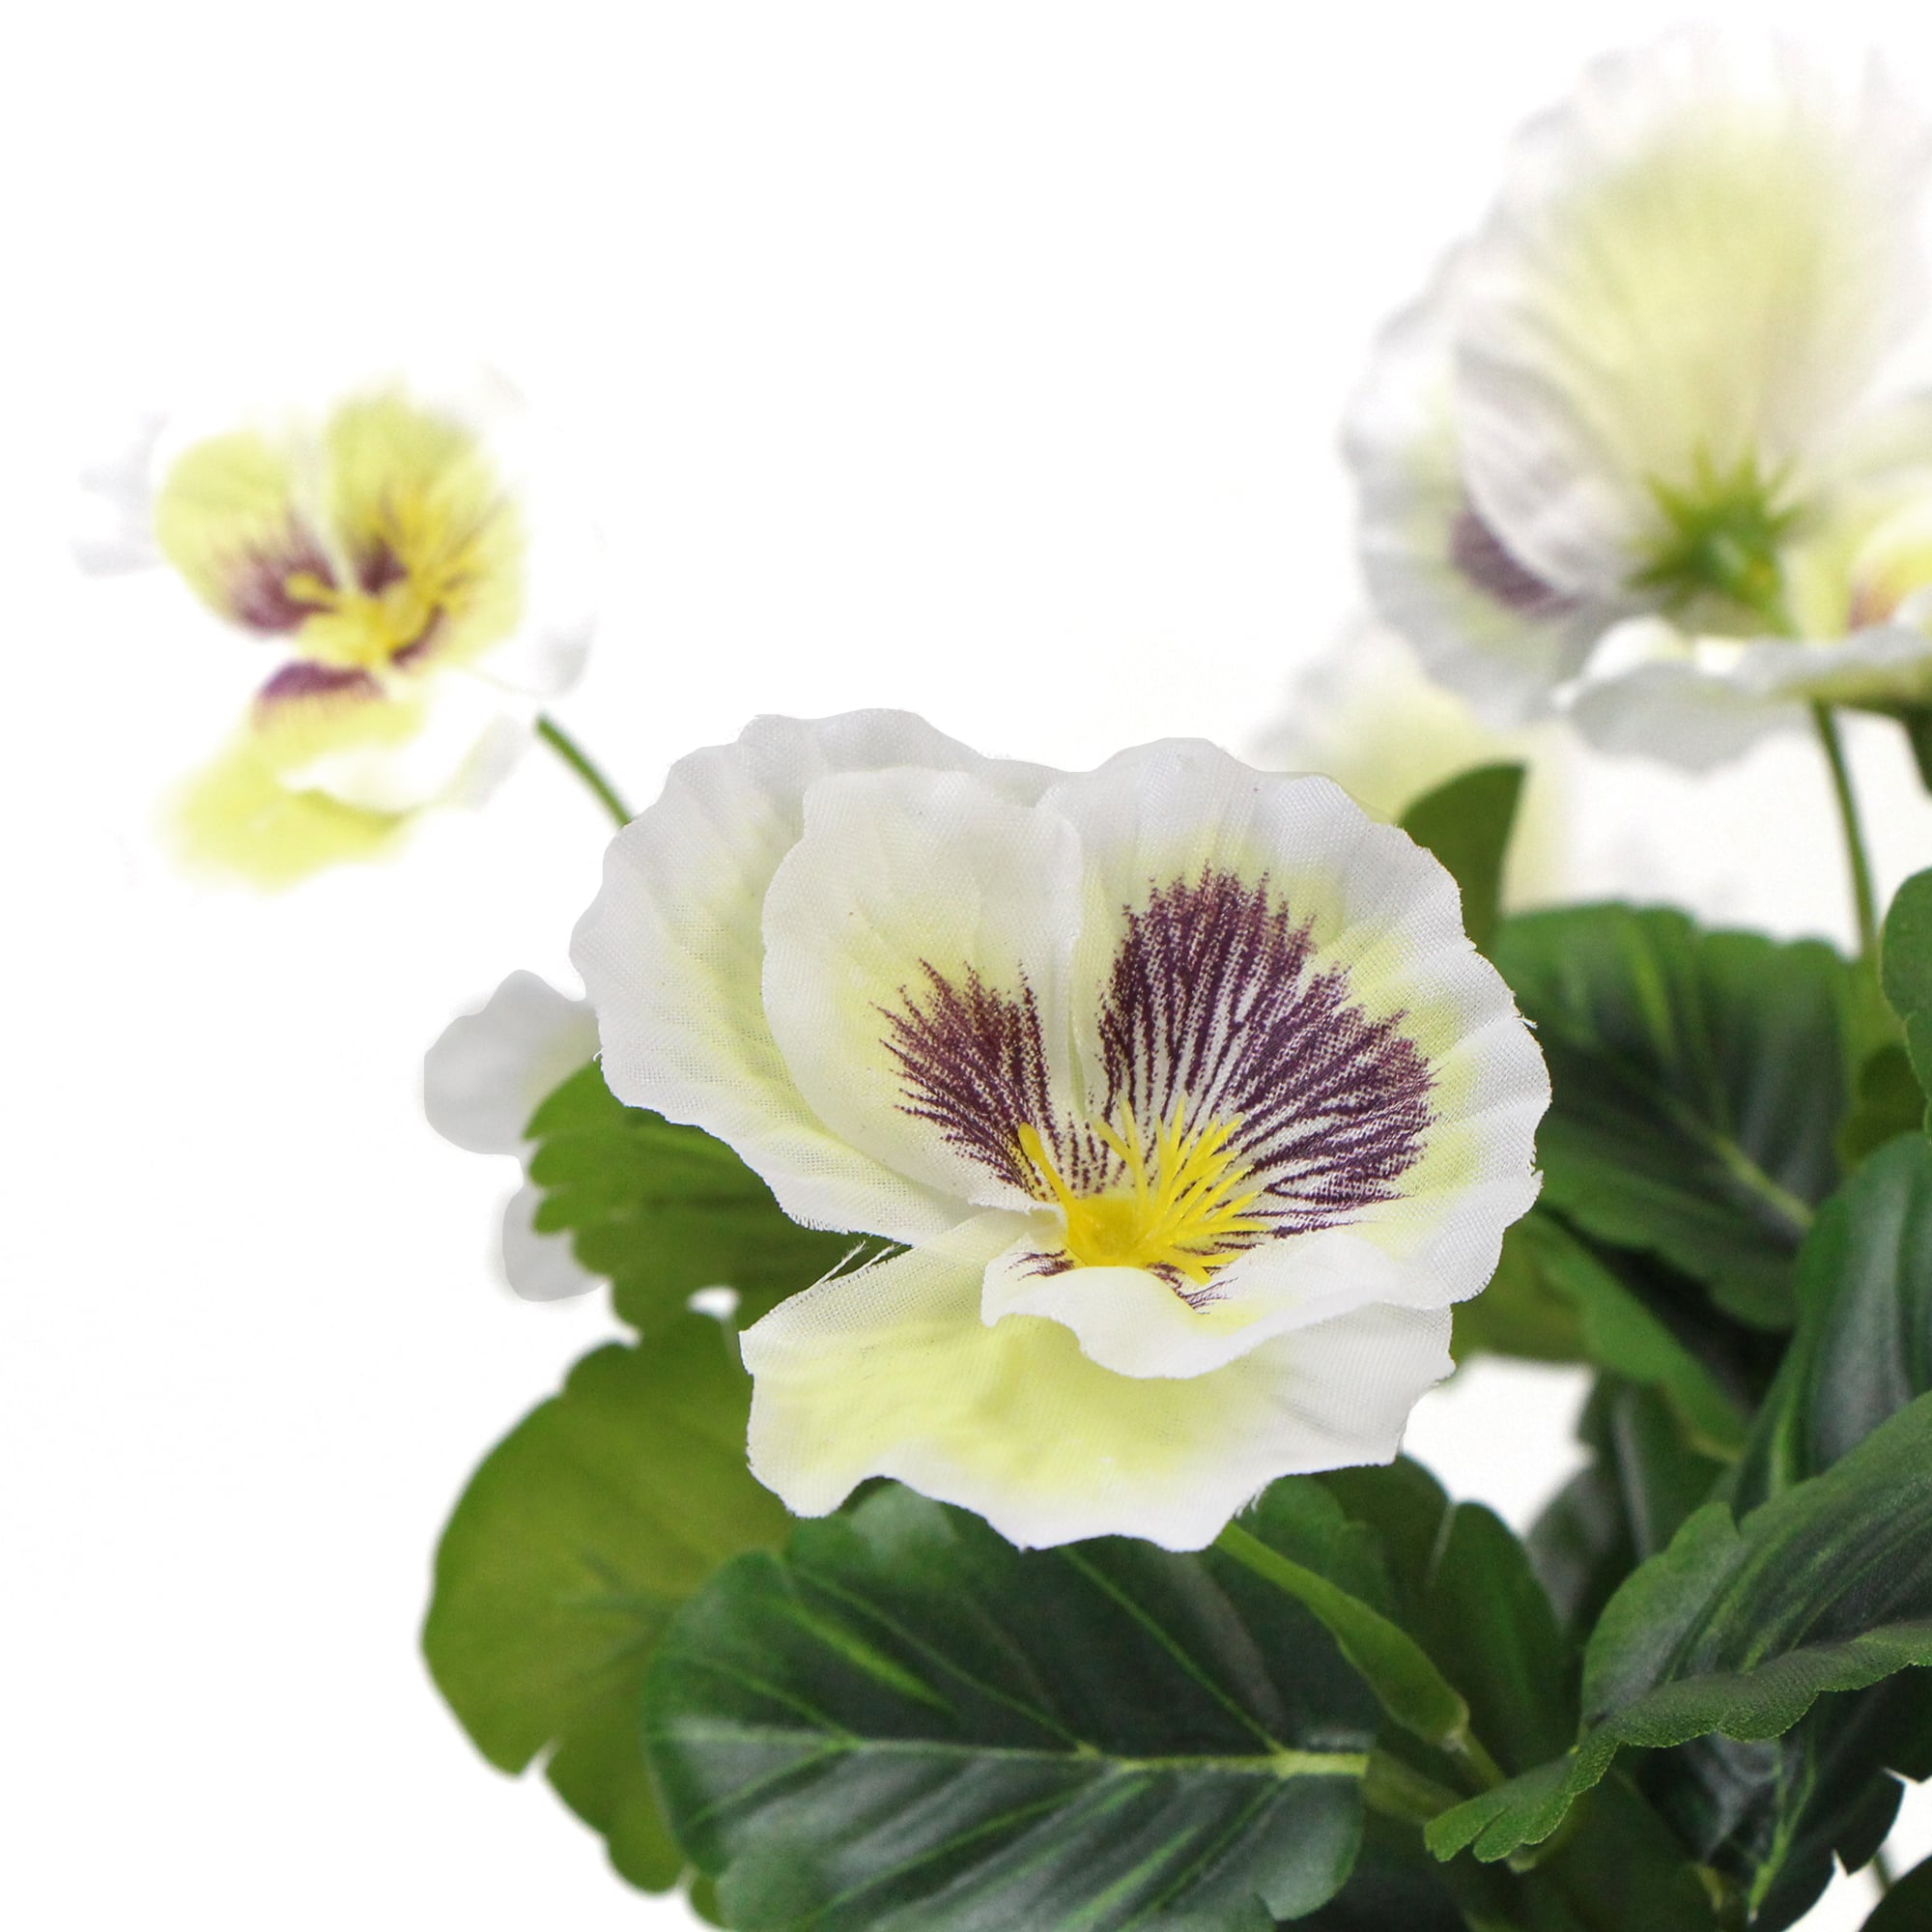 mixed-white-flowering-potted-artificial-pansy-plants-25cm